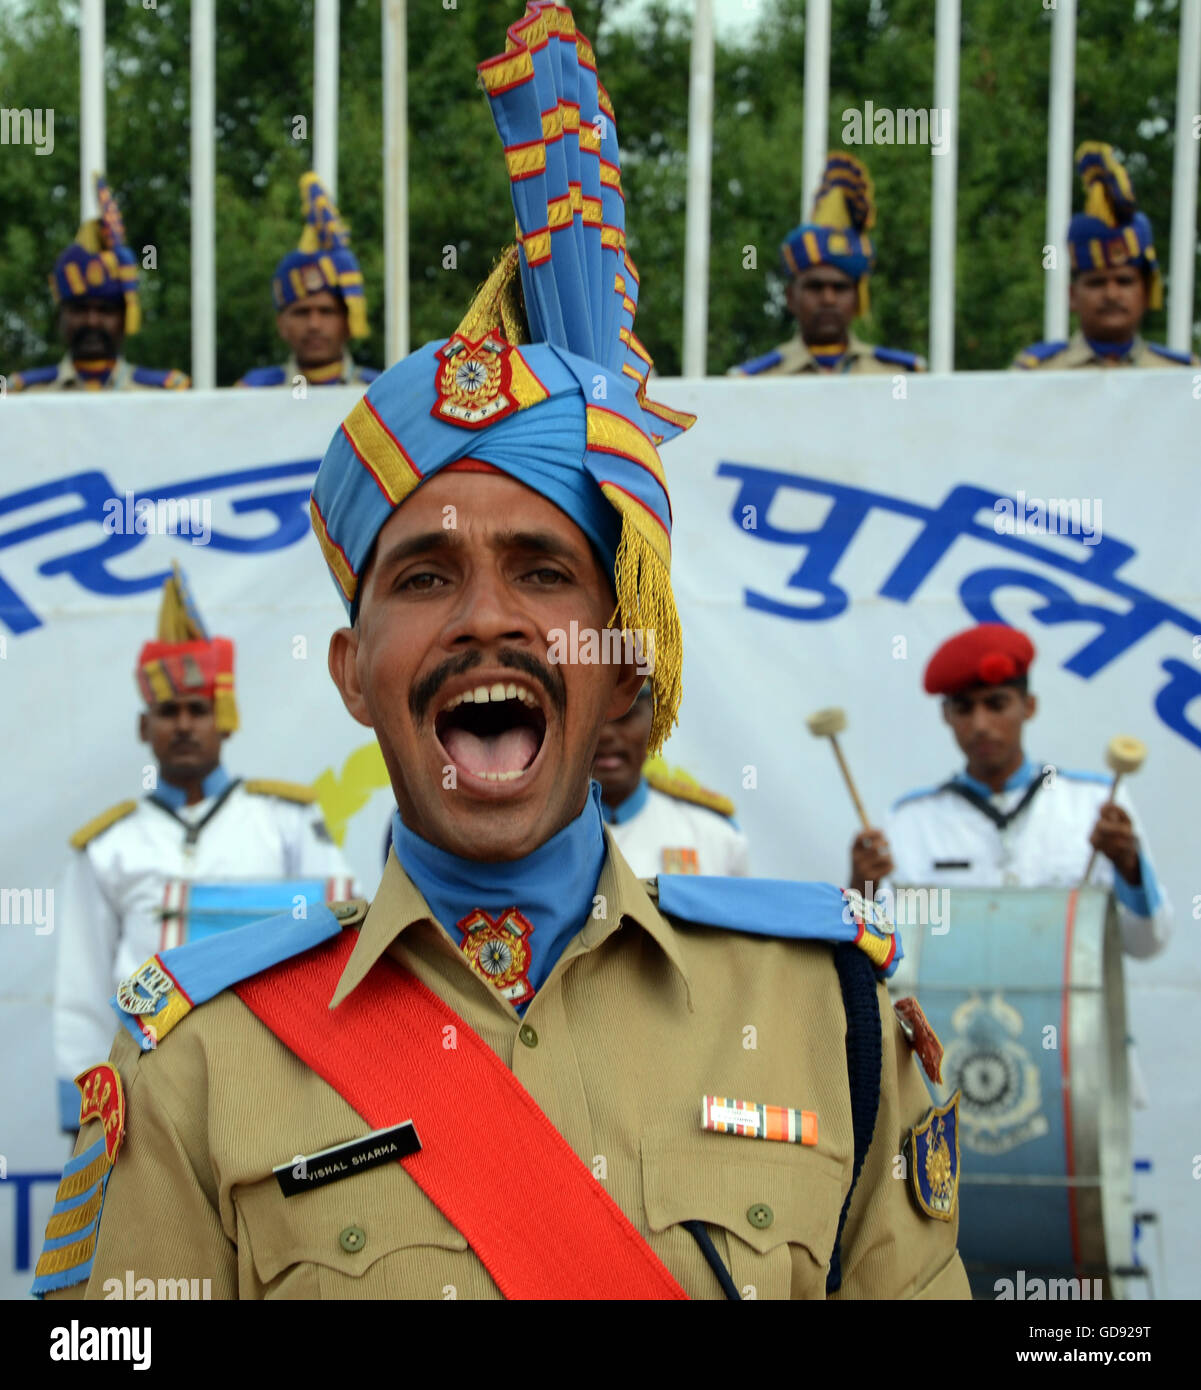 Srinagar, Indian Administered Kashmir. 14th July, 2016.  An Indian Central Reserve Police Force (C R P F) Constables shouts command during their passing out parade in Humhama, on the outskirts of Srinagar,India.512 newly trained CRPF recruits took an oath to serve India by working in the police force during their passing out parade. The recruits have successfully completed their 44 weeks of training which involved, weapons handling, map reading and counter-insurgency operations. These recruits will join Indian paramilitary to fight militants in Kashmir. Credit:  Sofi Suhail/Alamy Live News Stock Photo